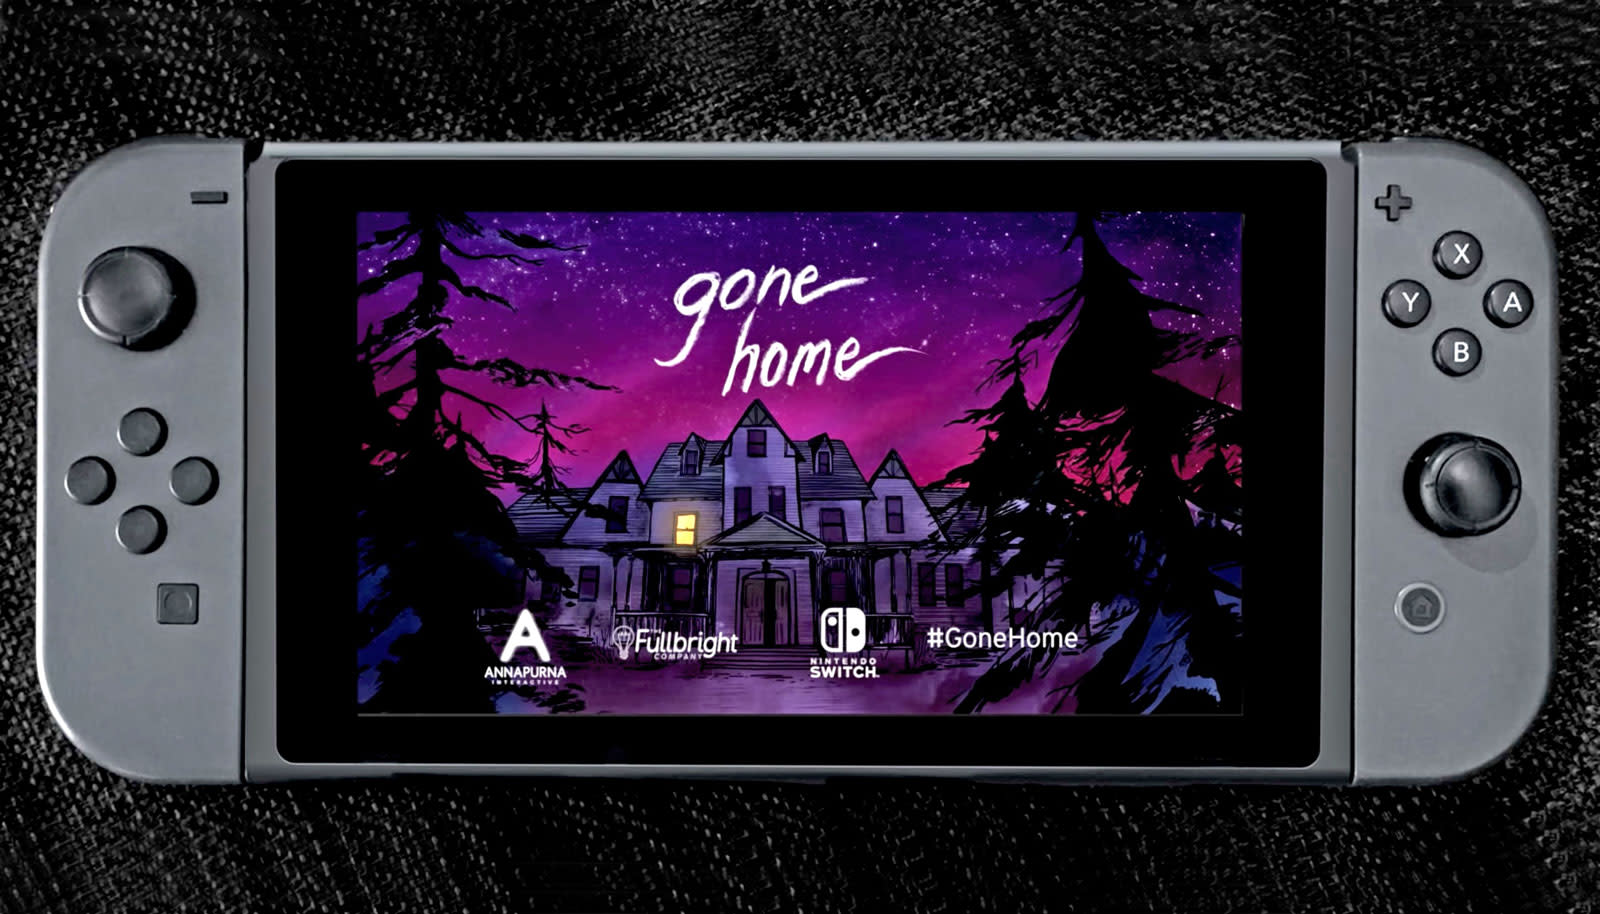 Gone home игра. Gone Home игра ps4. Nintendo Switch дом. Gone Home - Console Edition. Fullbright (Company) игры.